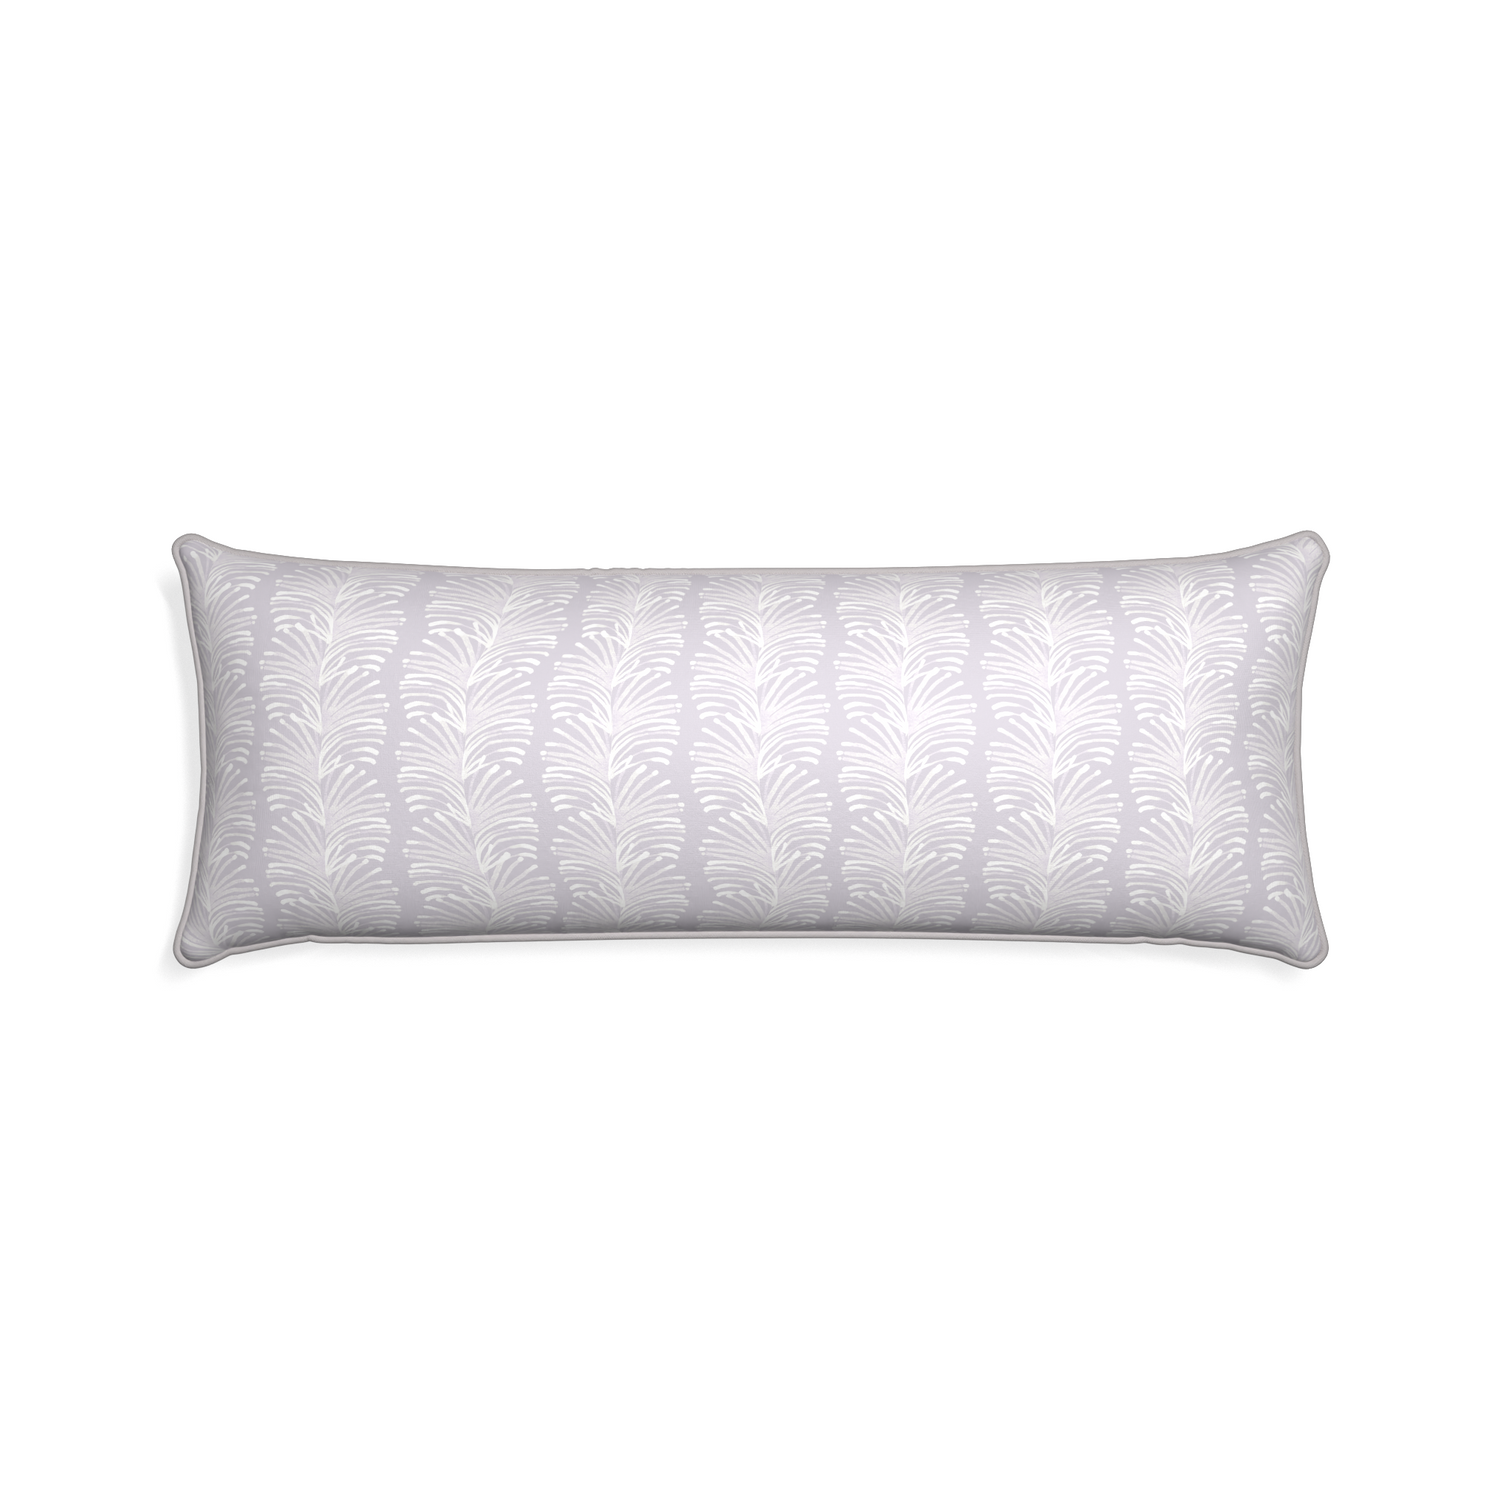 Xl-lumbar emma lavender custom pillow with pebble piping on white background